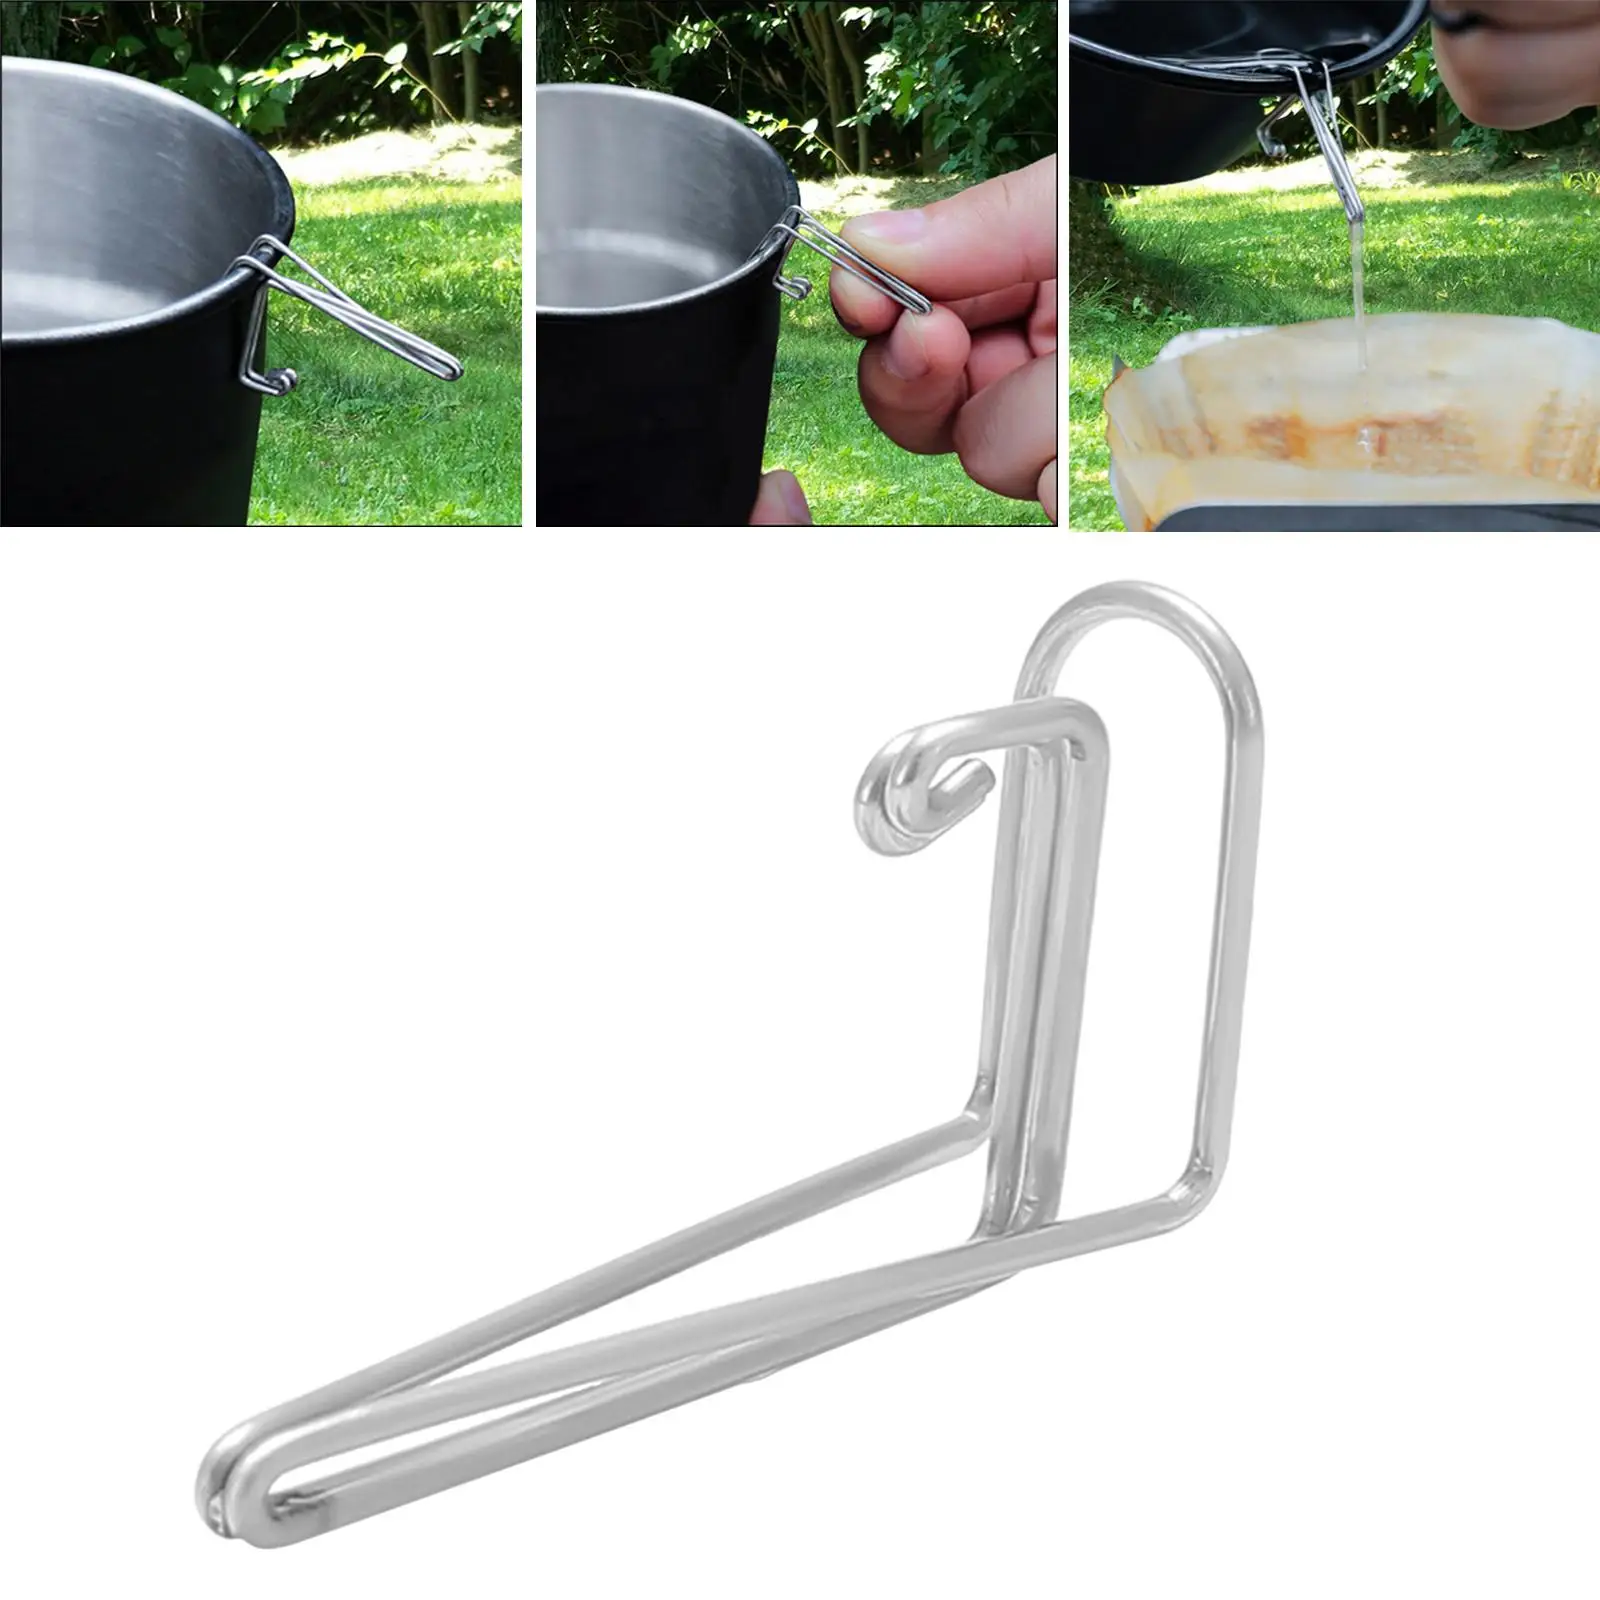 Pouring Spout for Camping Bowl Portable Stainless Steel Lightweight Extension Spout for Travel Outdoor BBQ Backpacking Hiking